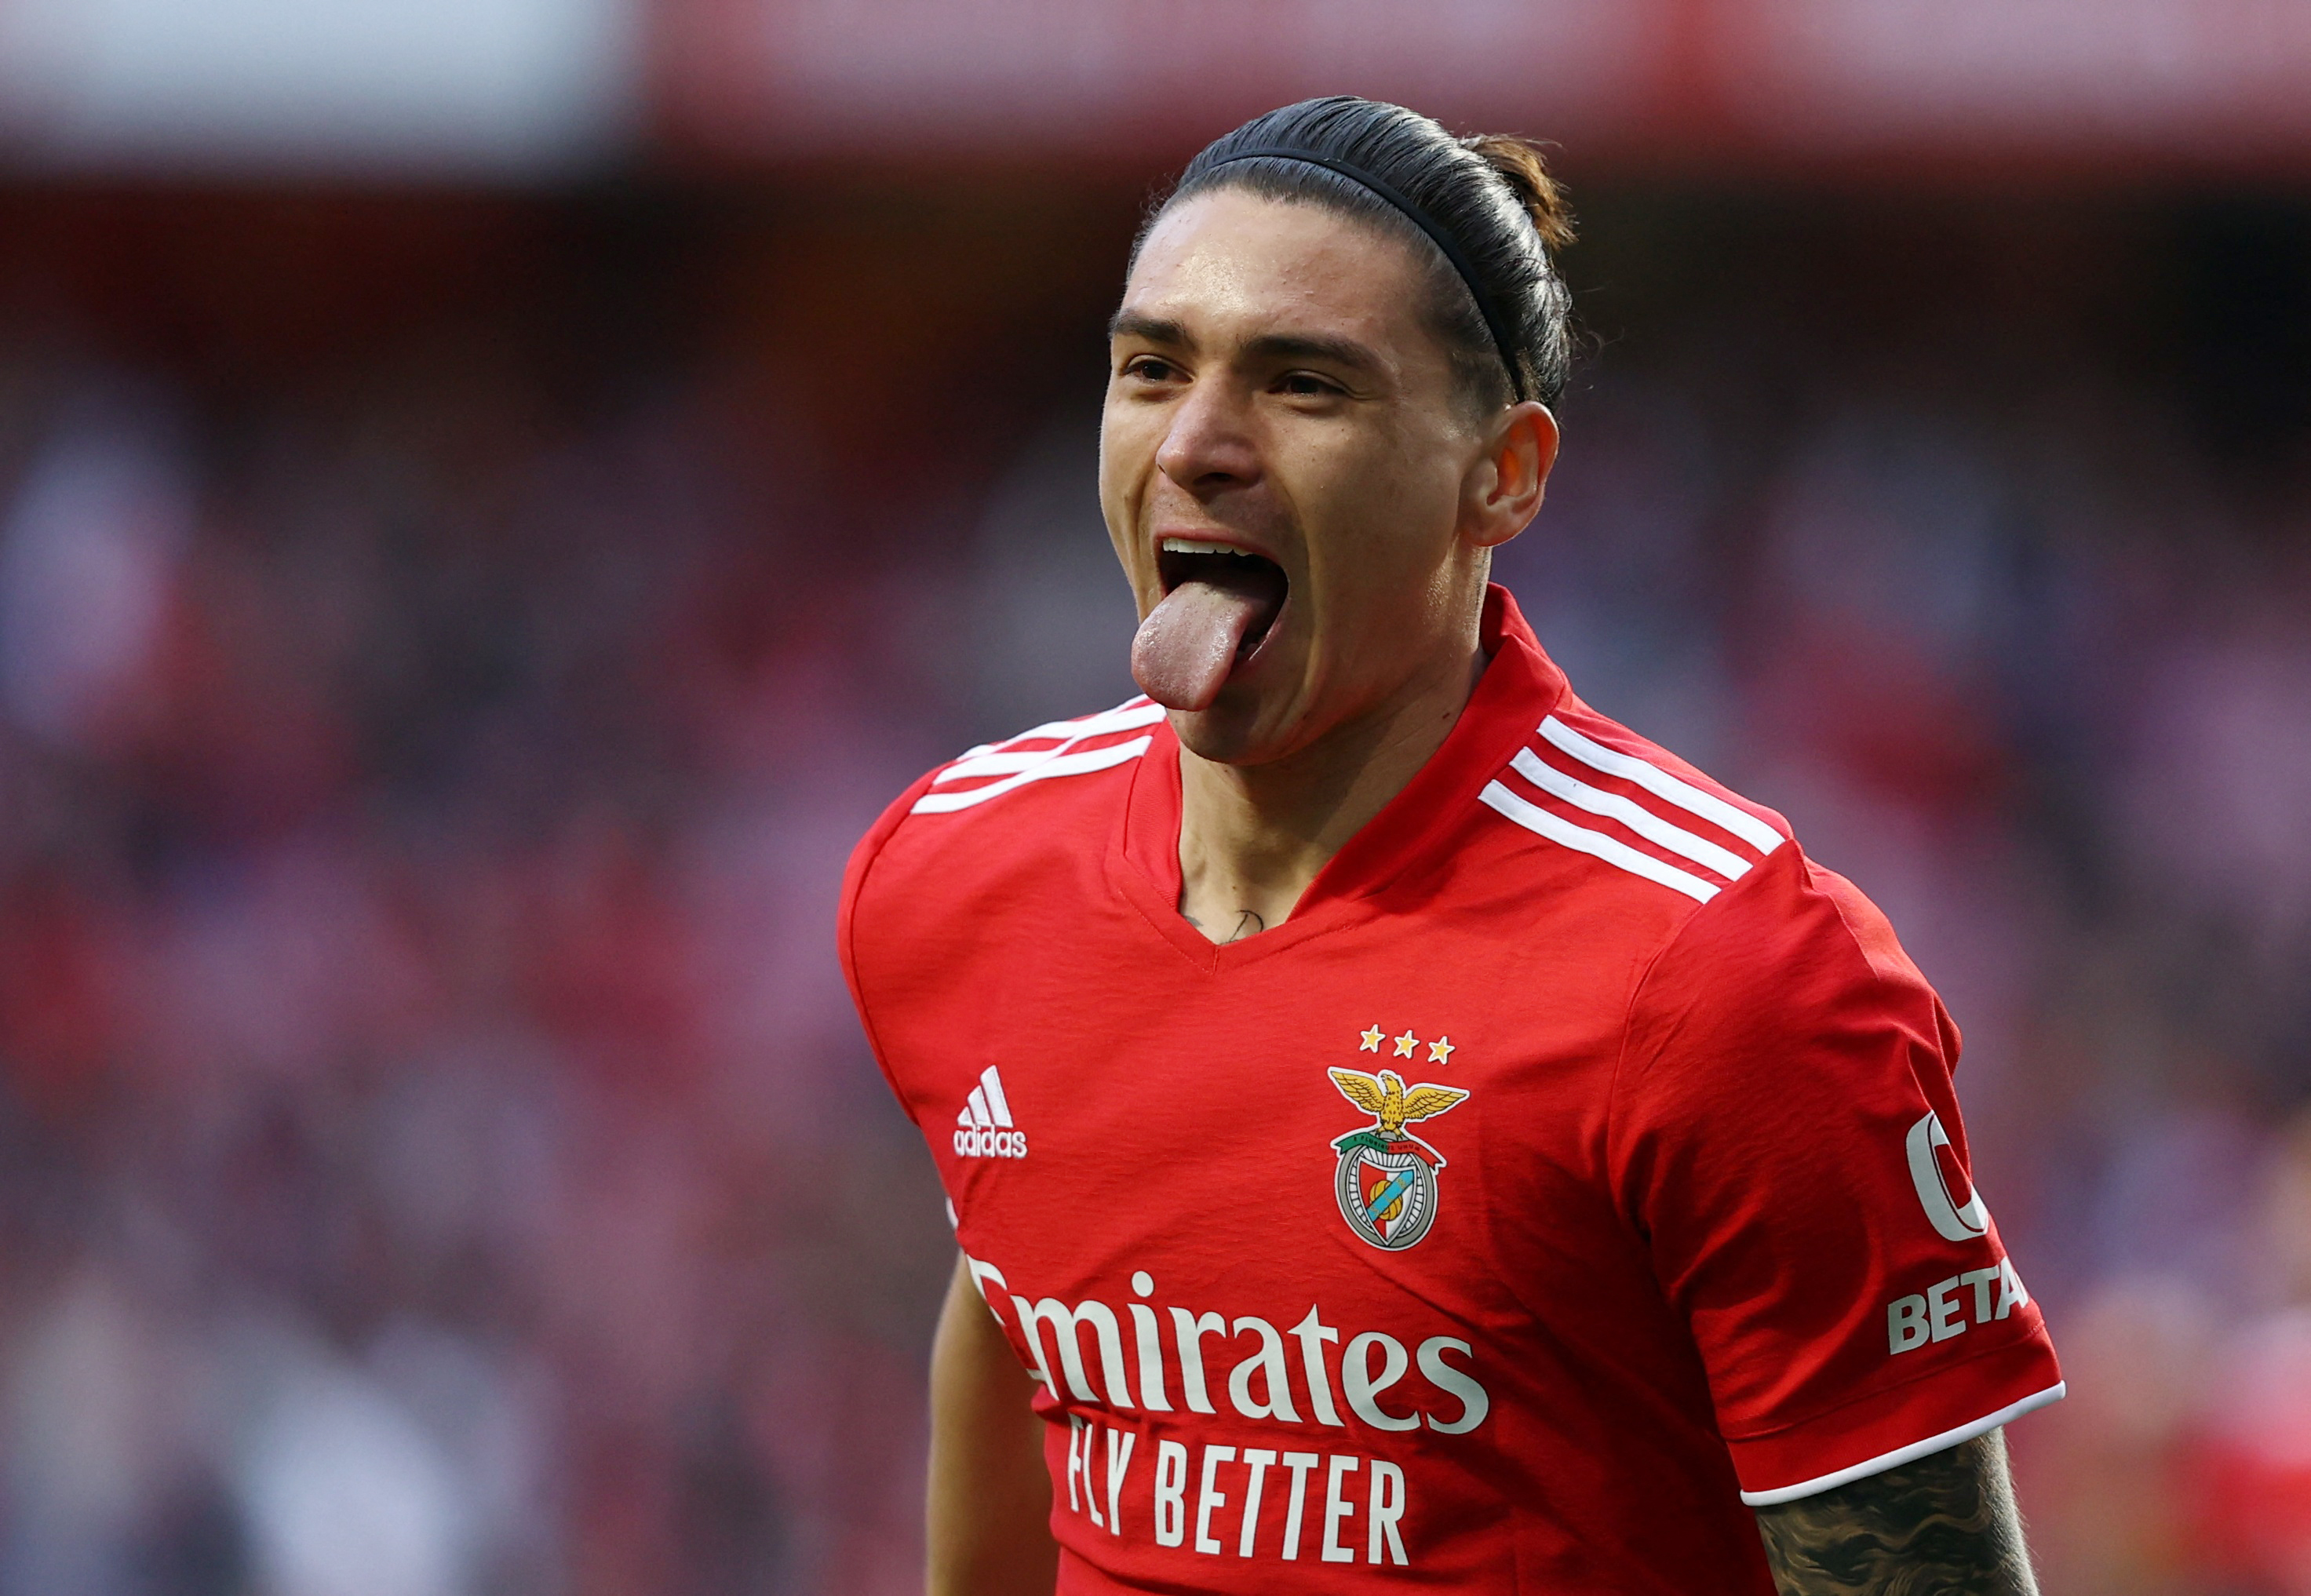 Man Utd and Arsenal transfer boost in £60million pursuit of Darwin Nunez as 'Benfica find replacement for star striker'